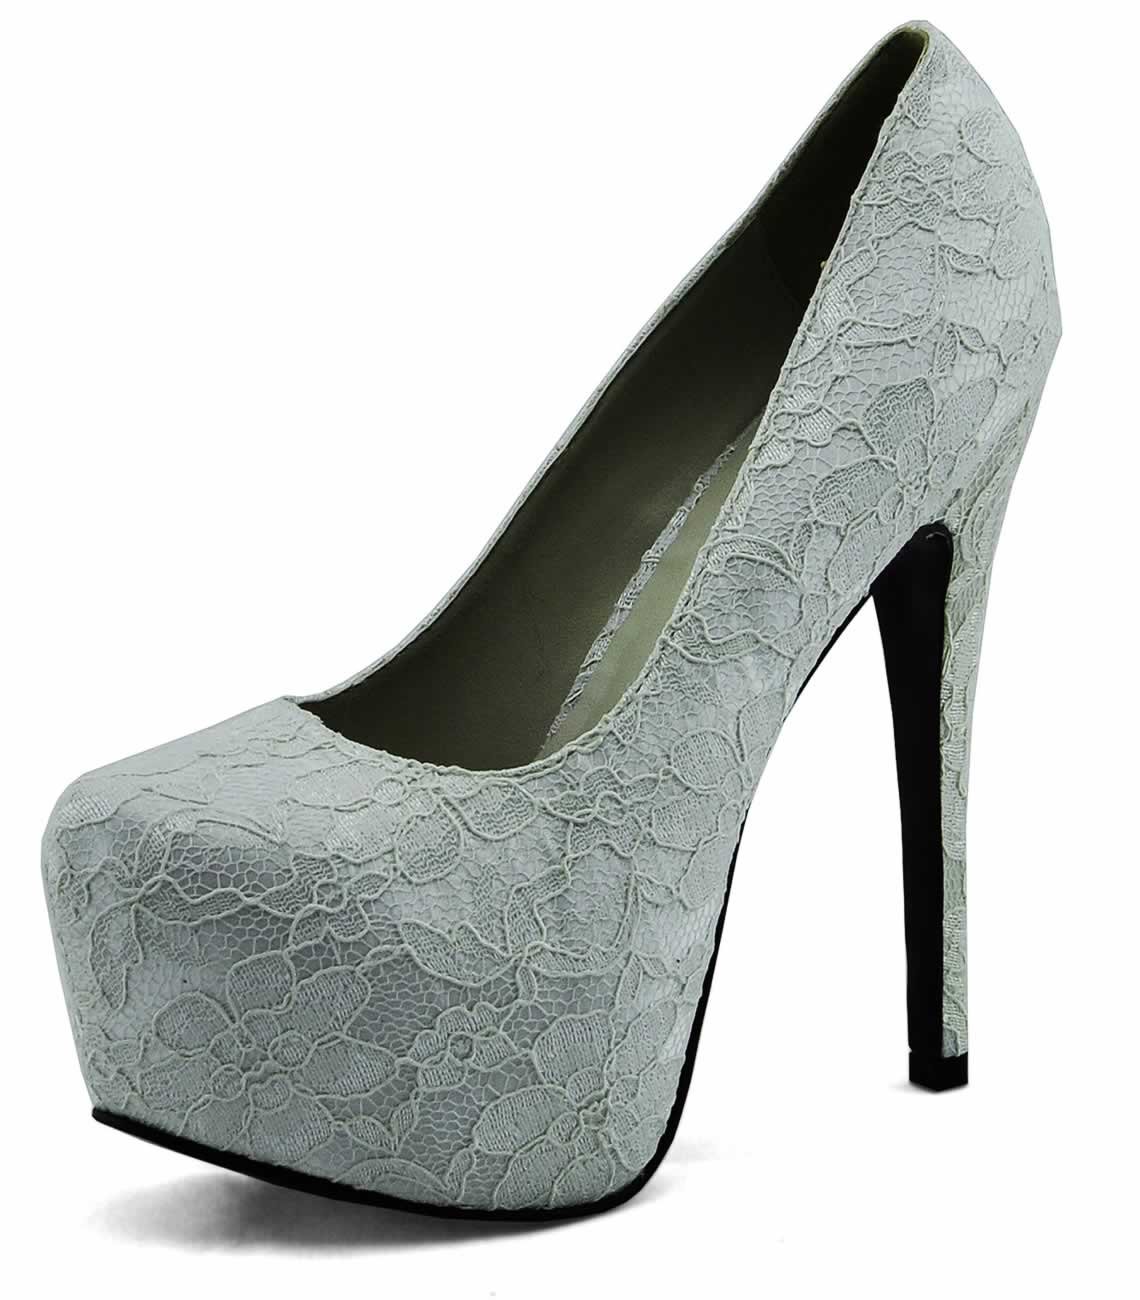 Wholesale Shoes :: LSS00125 - Ivory Lace Covered Platform ...